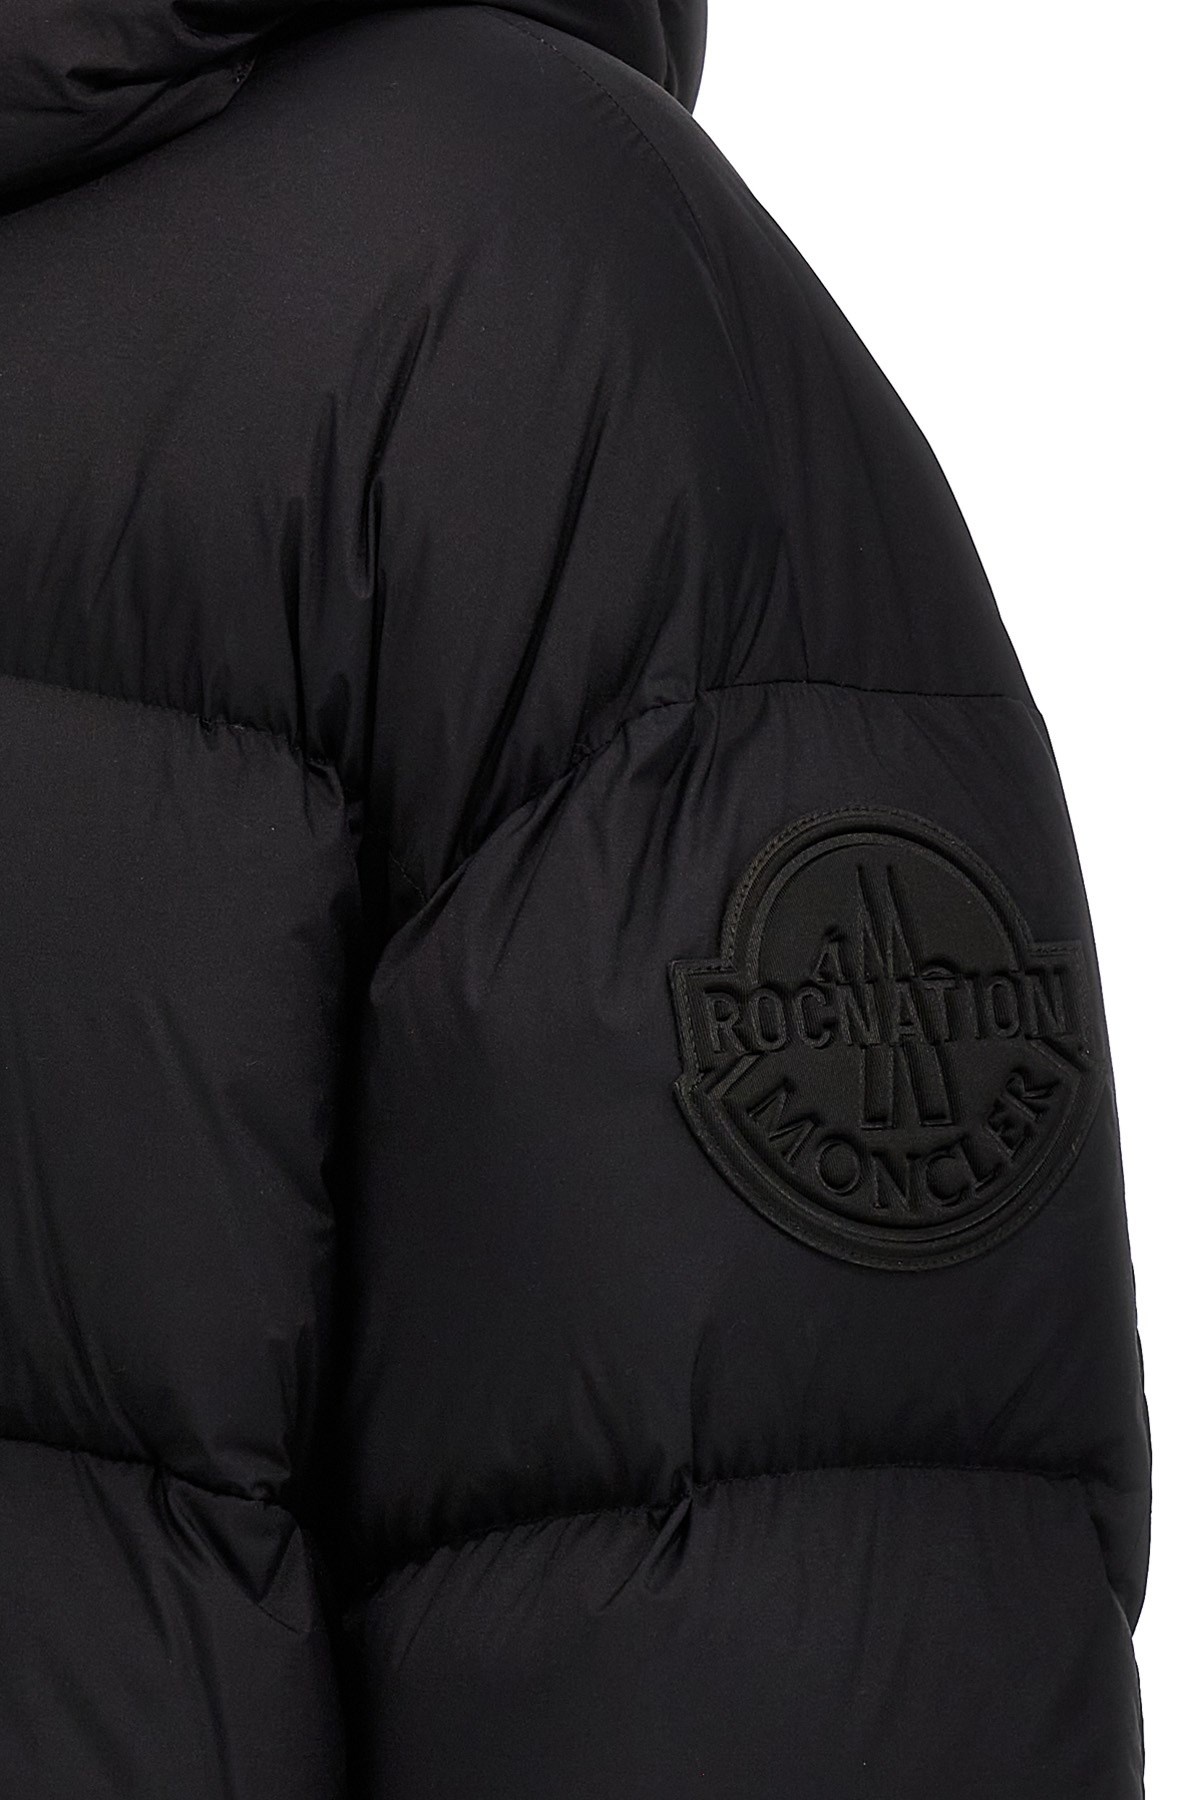 Moncler Genius Roc Nation by Jay-Z down jacket - 6